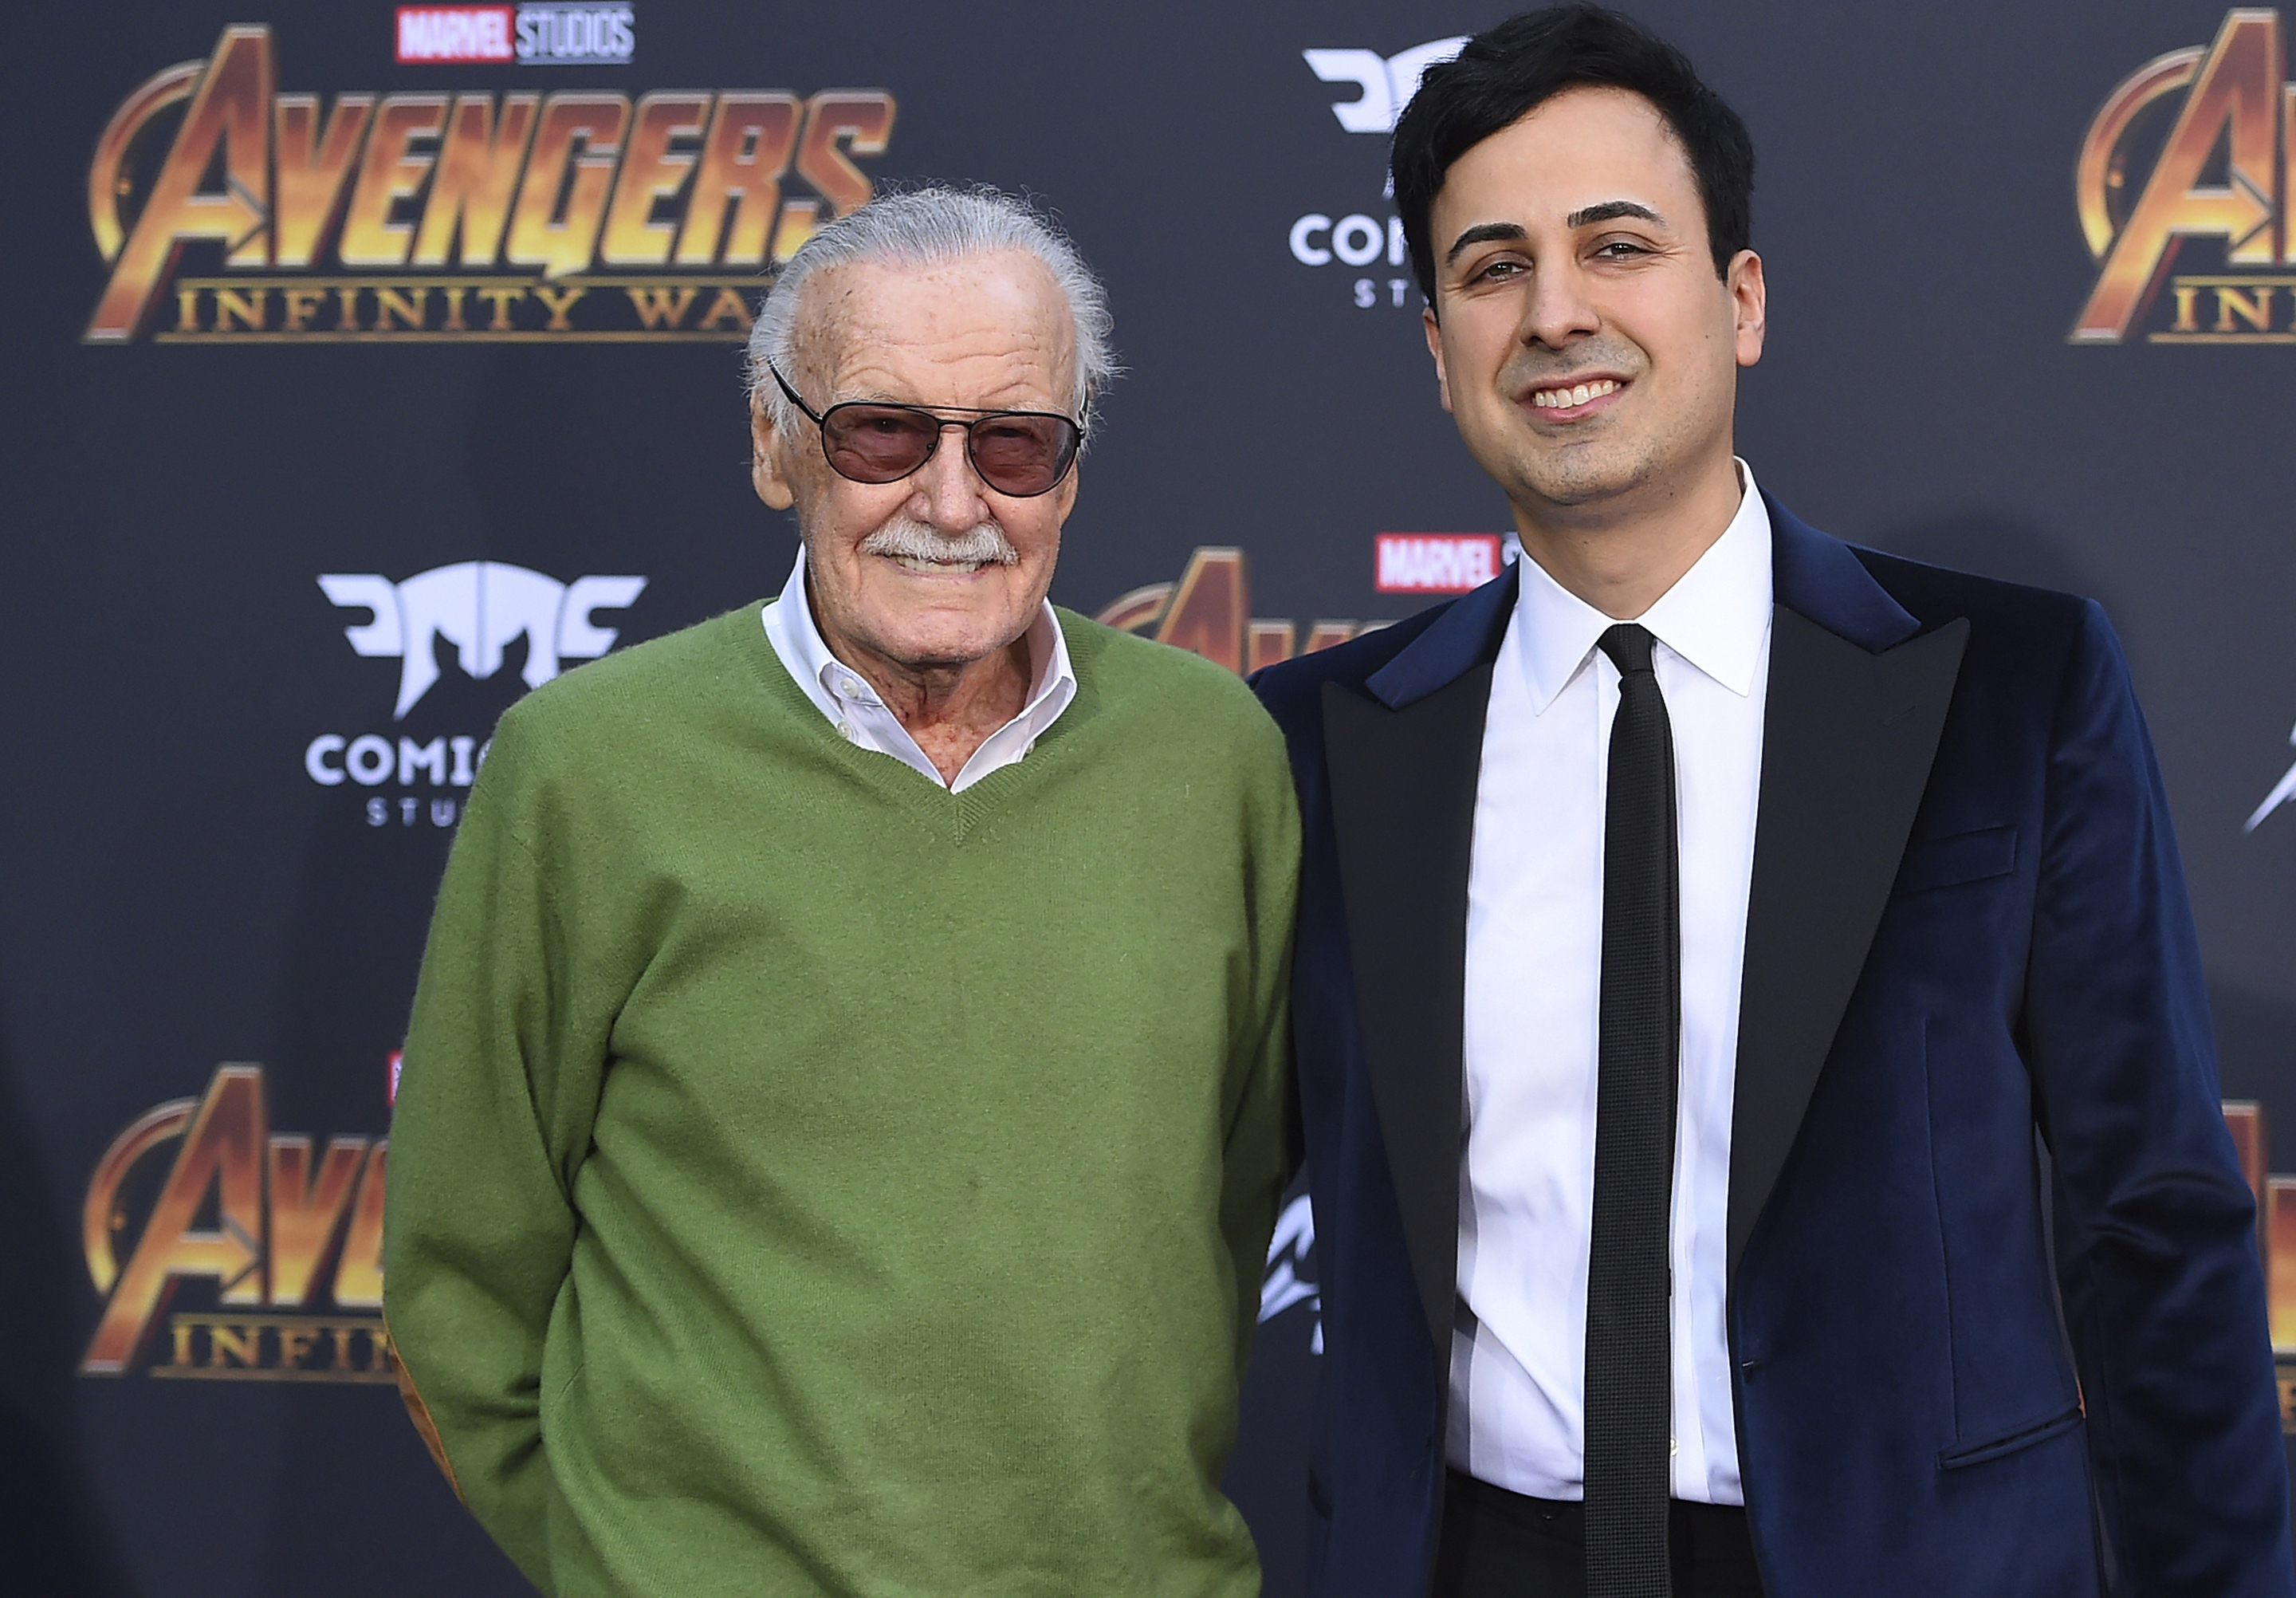 FILE - In this April 23, 2018, file photo, Stan Lee, left, and Keya Morgan arrive at the world premiere of "Avengers: Infinity War" in Los Angeles. Morgan, the former business manager of Lee has been arrested on elder abuse charges involving the late comic book icon. Los Angeles police say  Morgan was taken into custody in Arizona early Saturday, May 25, 2019, on an outstanding arrest warrant. Morgan was charged earlier this month with felony allegations of theft, embezzlement, forgery or fraud against an elder adult, and false imprisonment of an elder adult. (Photo by Jordan Strauss/Invision/AP, File)